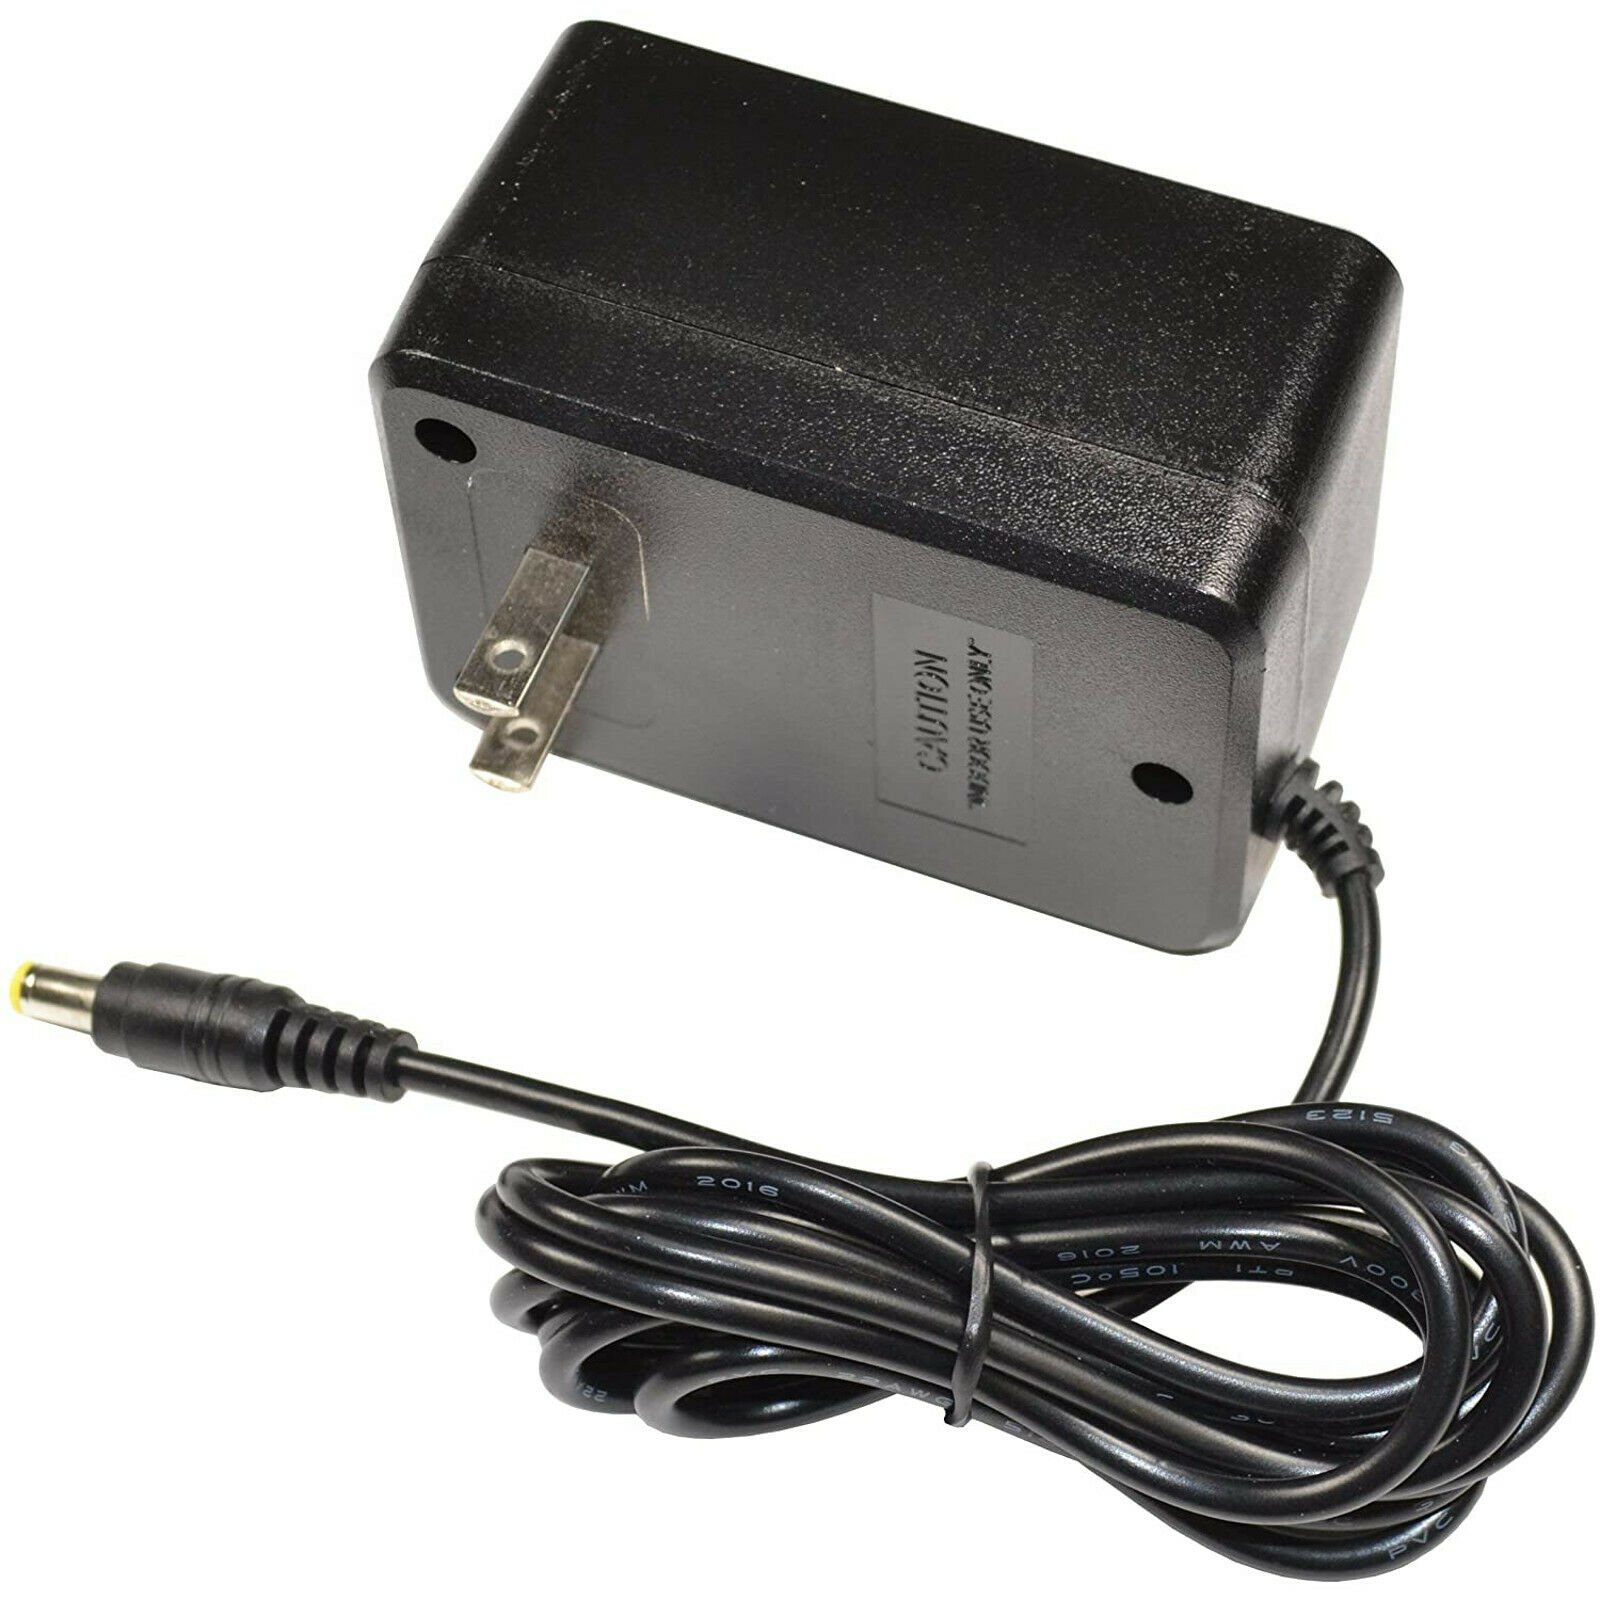 AC Adapter For Boss Roland SE-50 Stereo Effects Processor Power Supply Charger 1 AC input voltage ……120VAC 2 Input freq